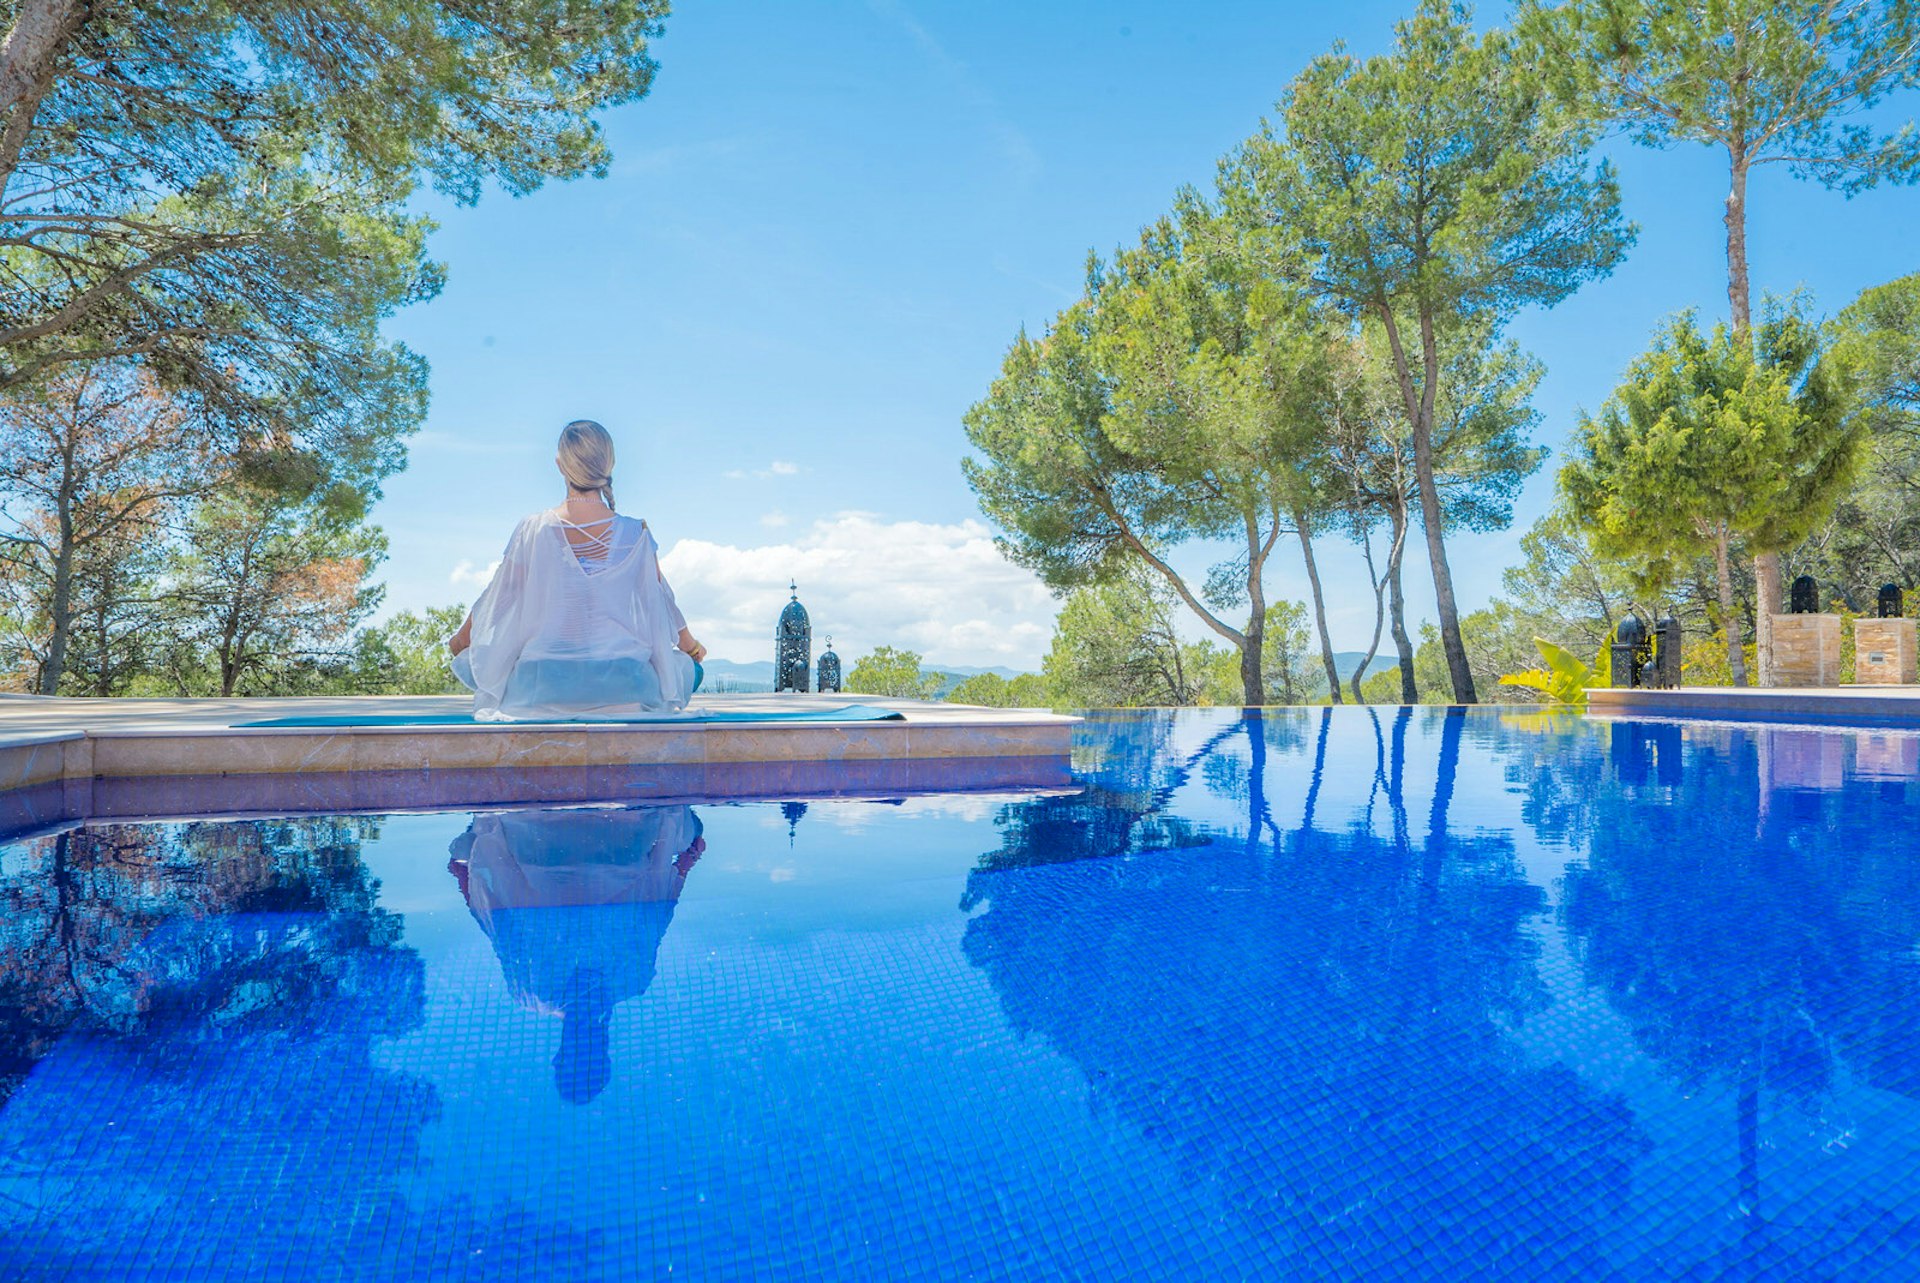 Ibiza spa breaks - a blonde person sits cross-legged in meditation with their back to the camera, next to a pristine blue pool